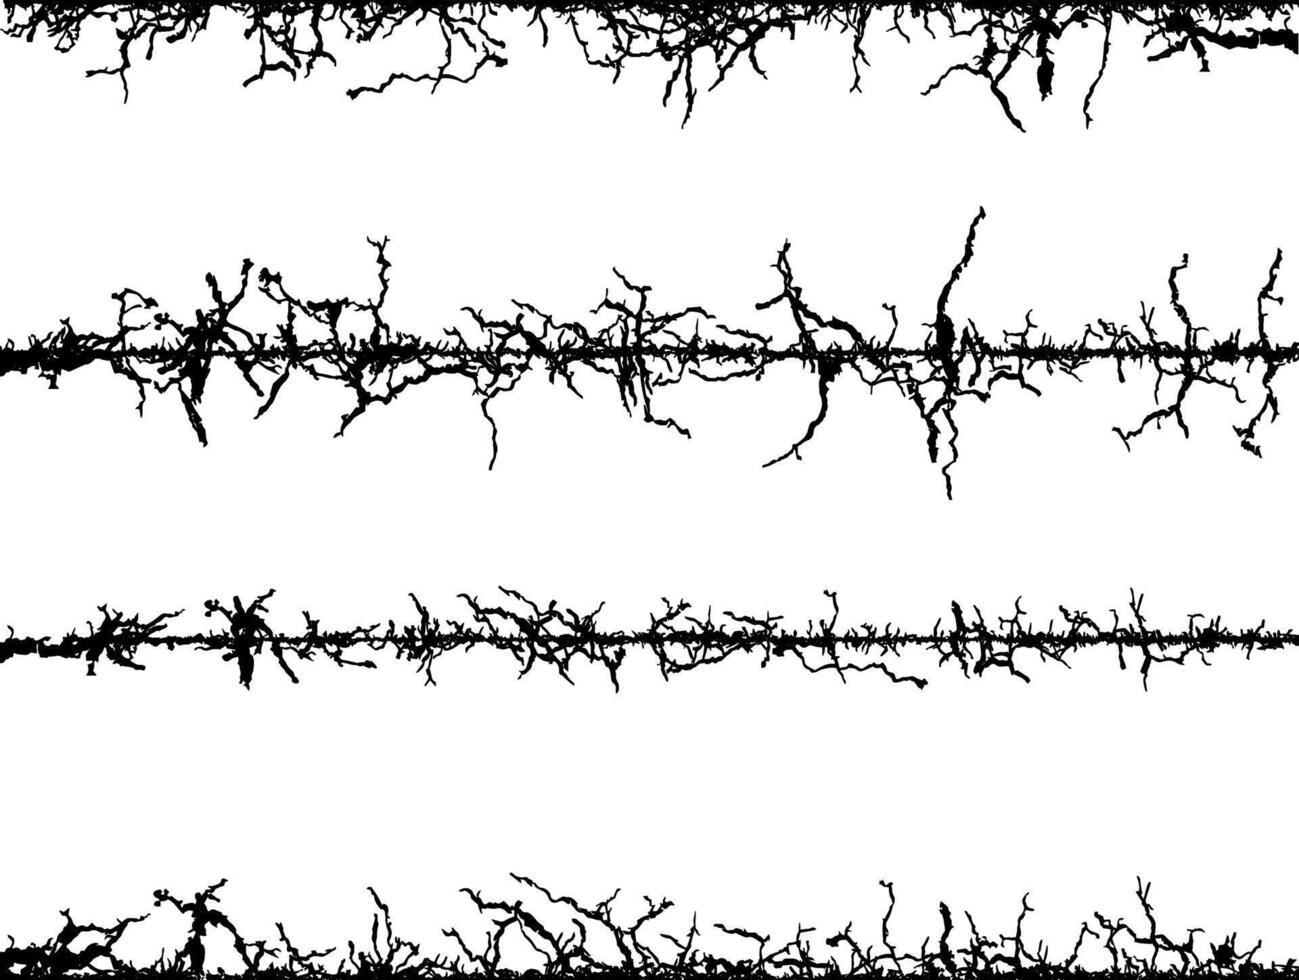 frame of wire, barbed wire texture set, black and white barbed wire border, sound waves in different shapes and sizes, vector